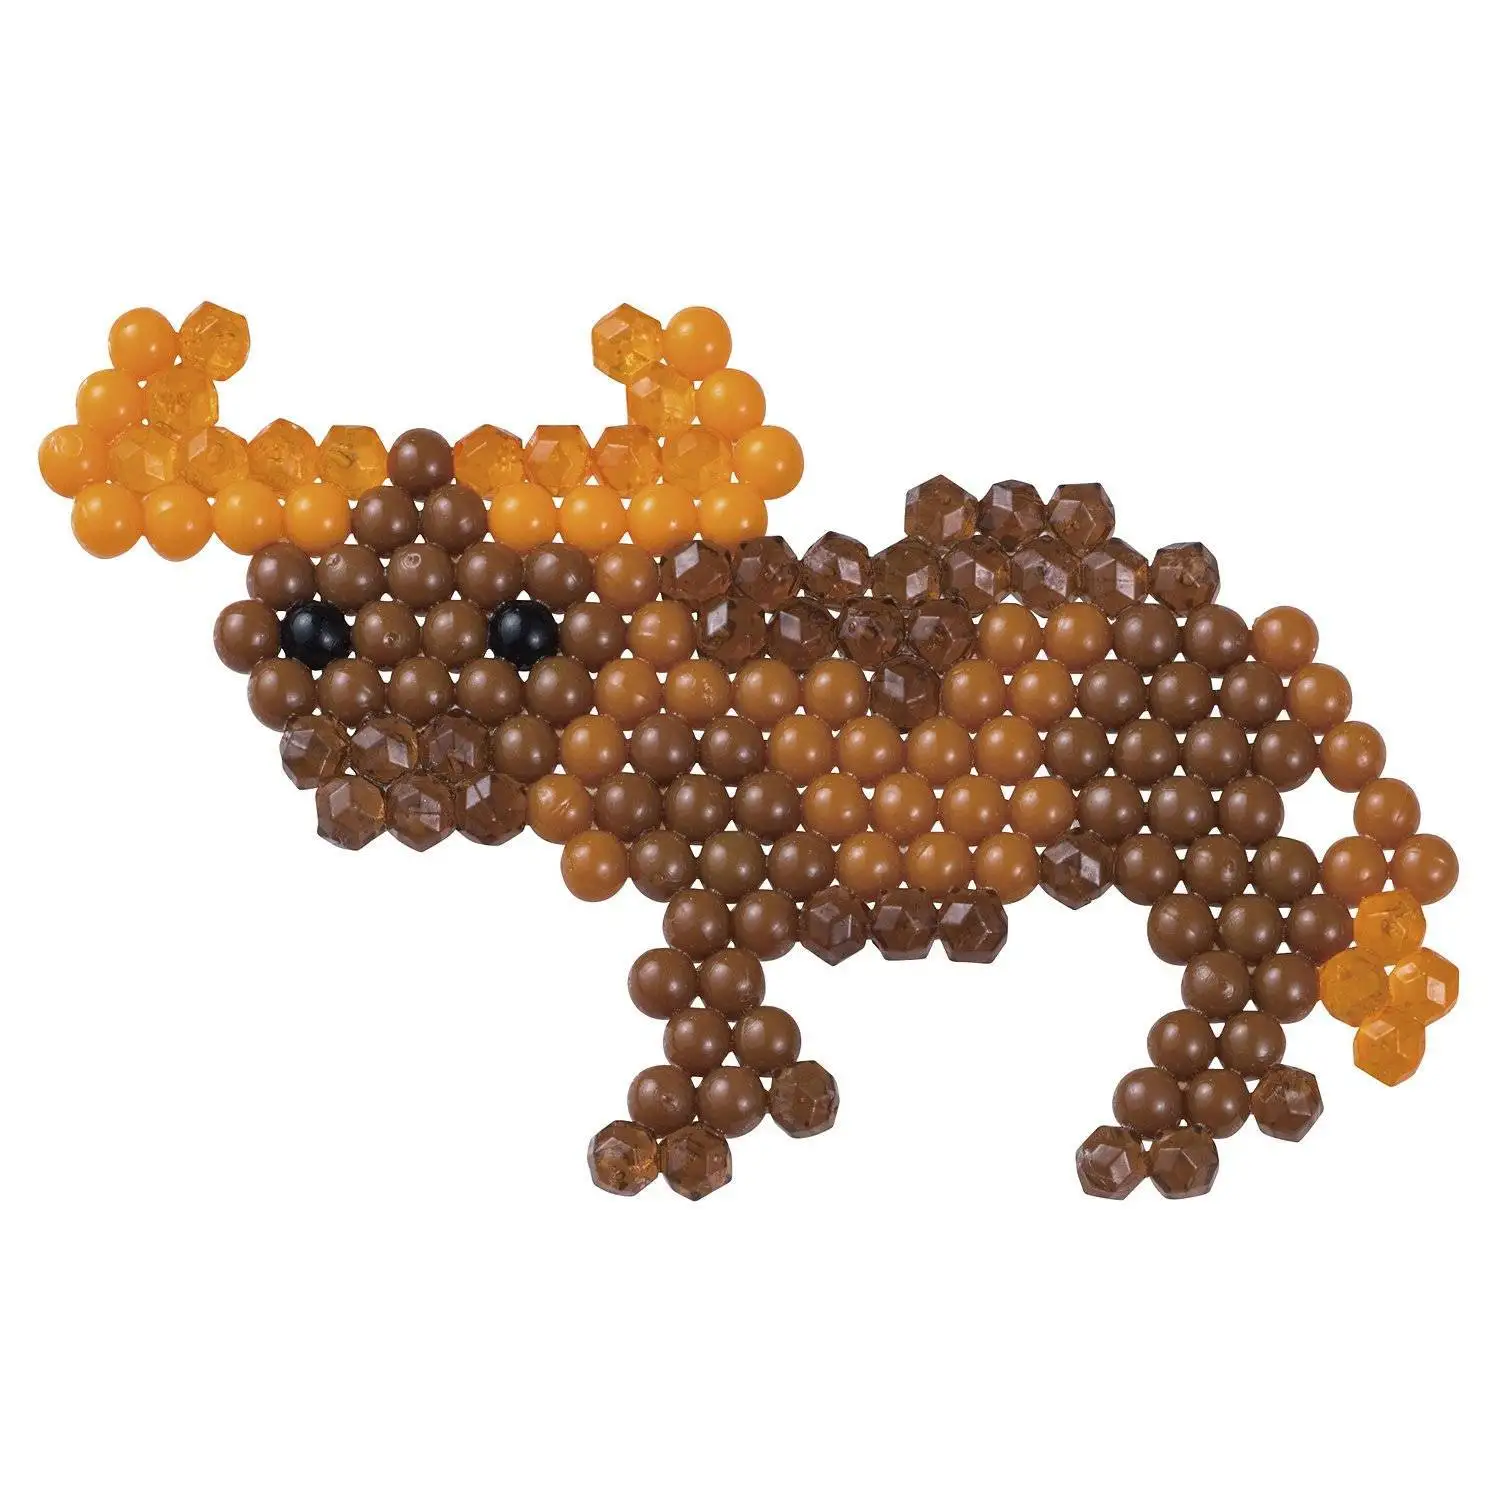 Aquabeads set safari Hobbies and creativity, games for children, DIY  crafts, Science, play sets, learning kits.